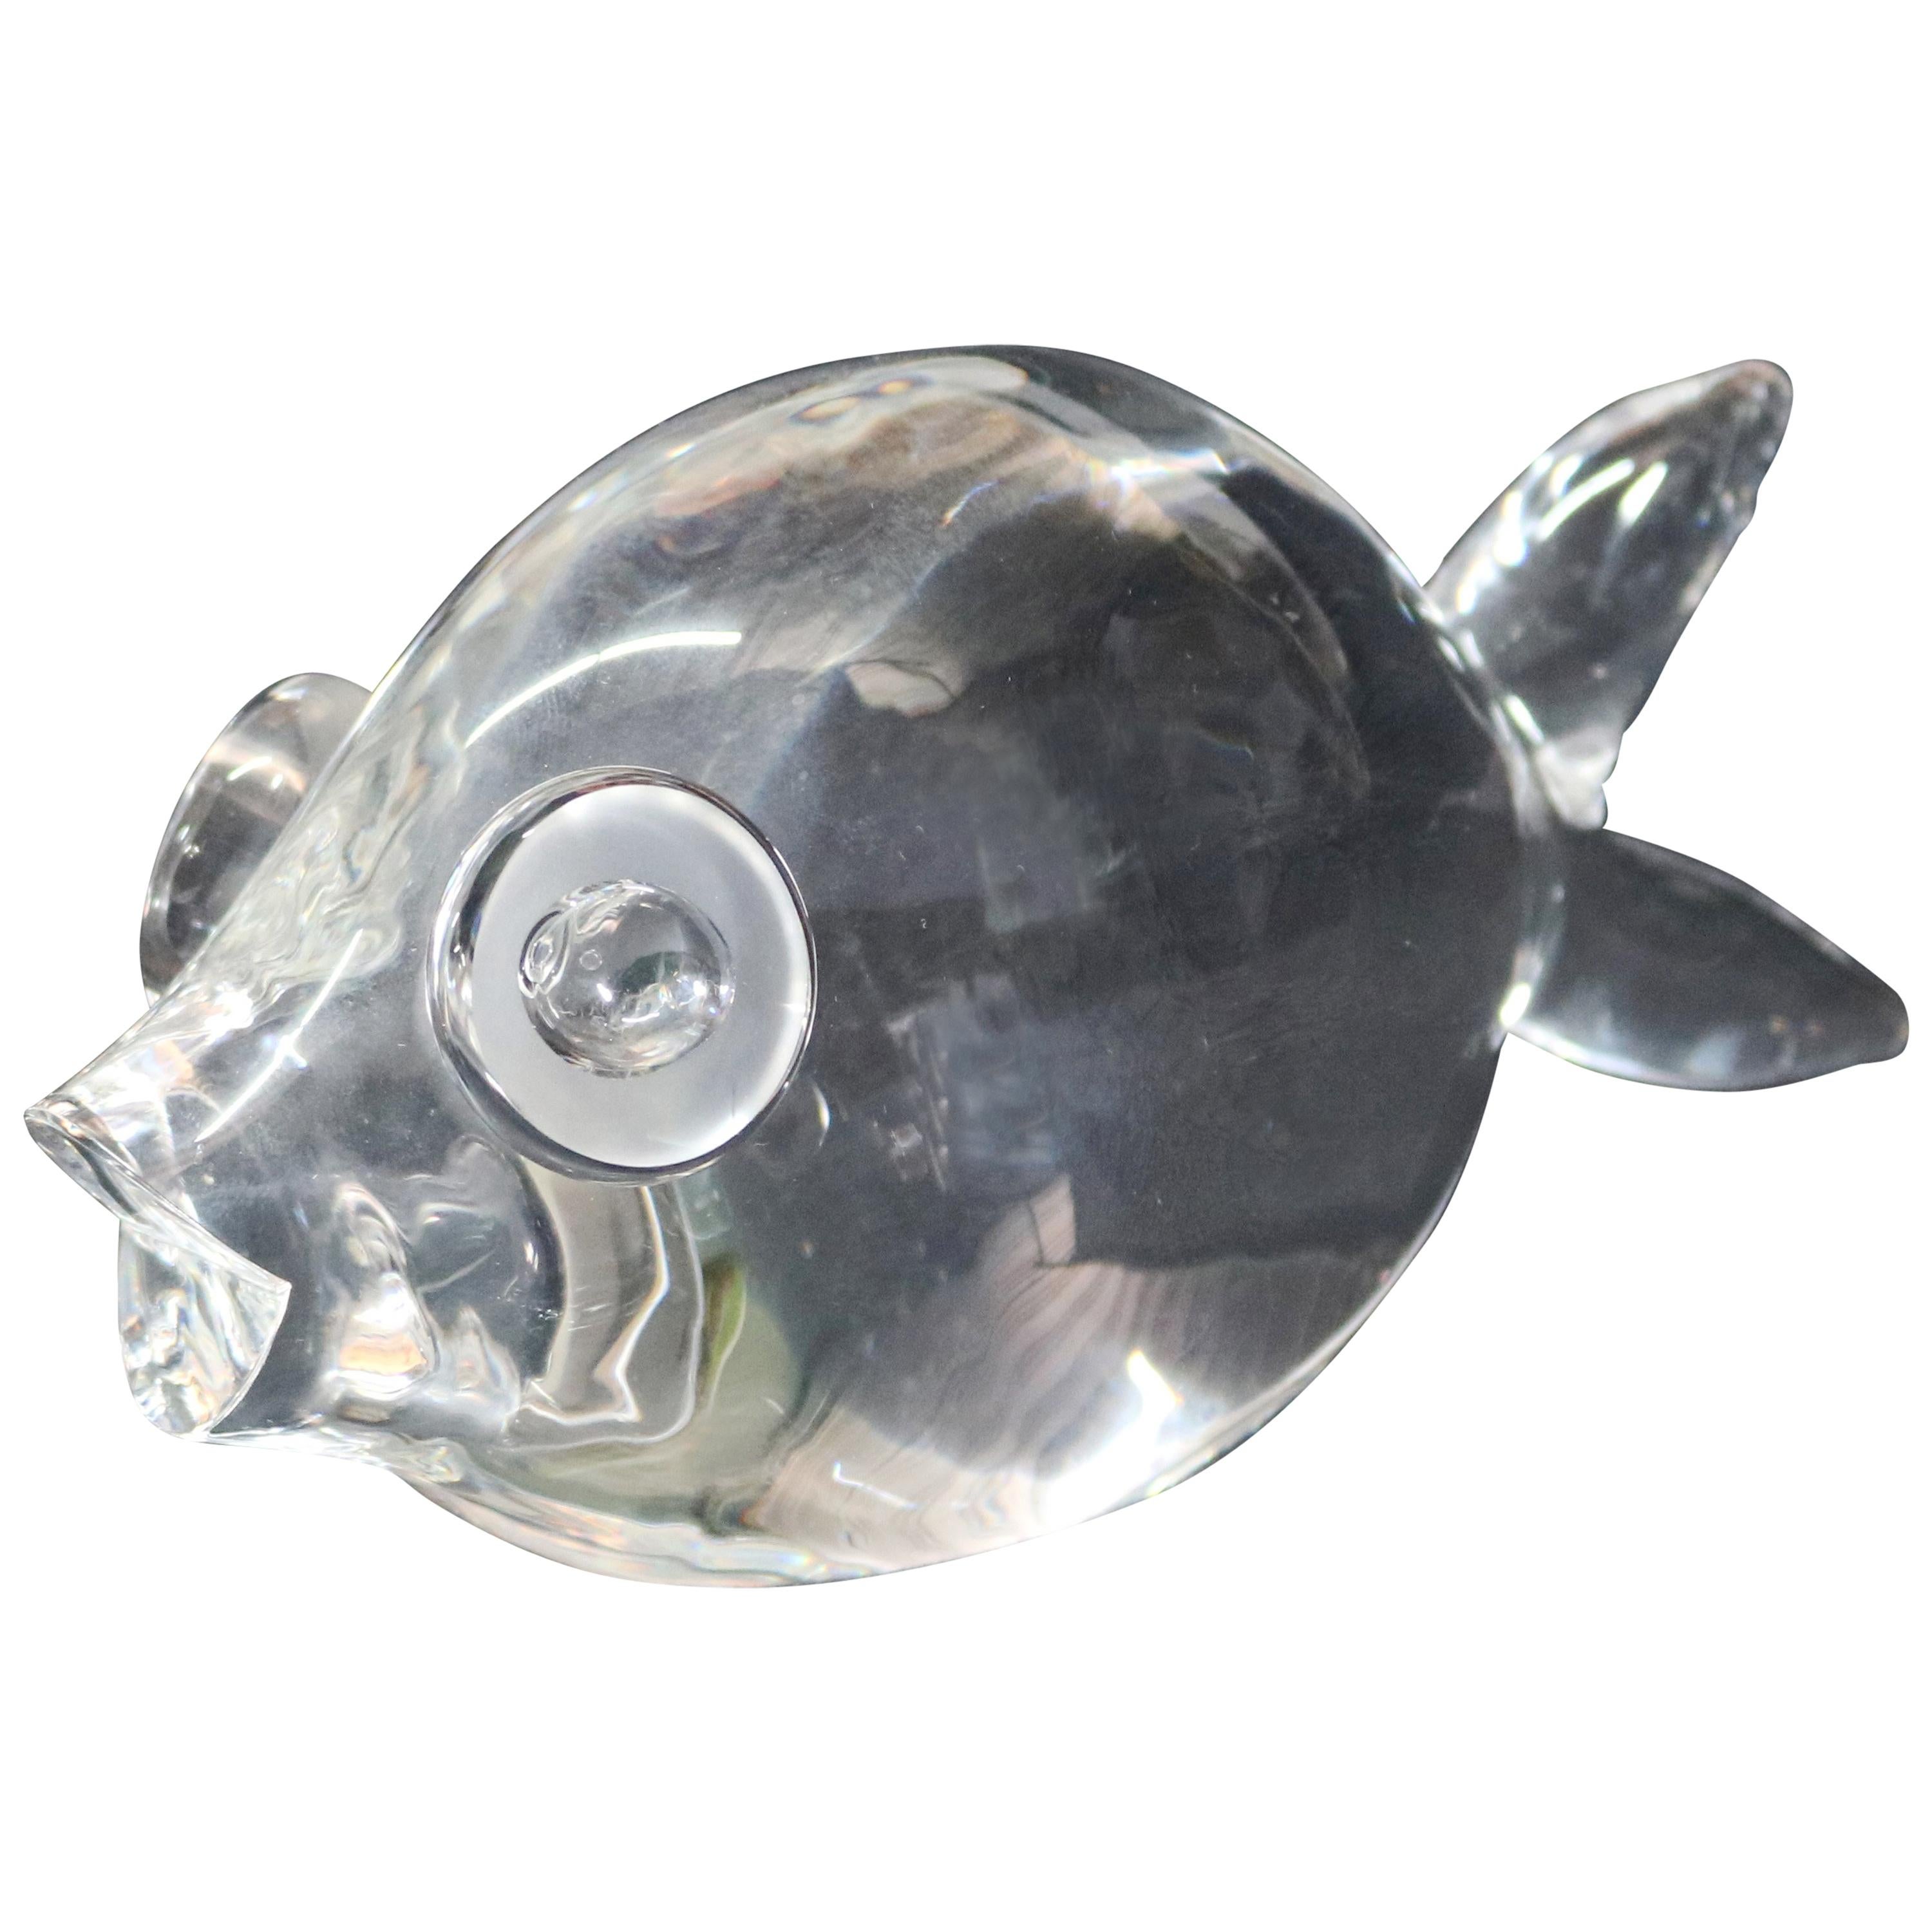 Steuben Figurative Crystal Sculpture Puffer Fish Paperweight by Thompson, Signed